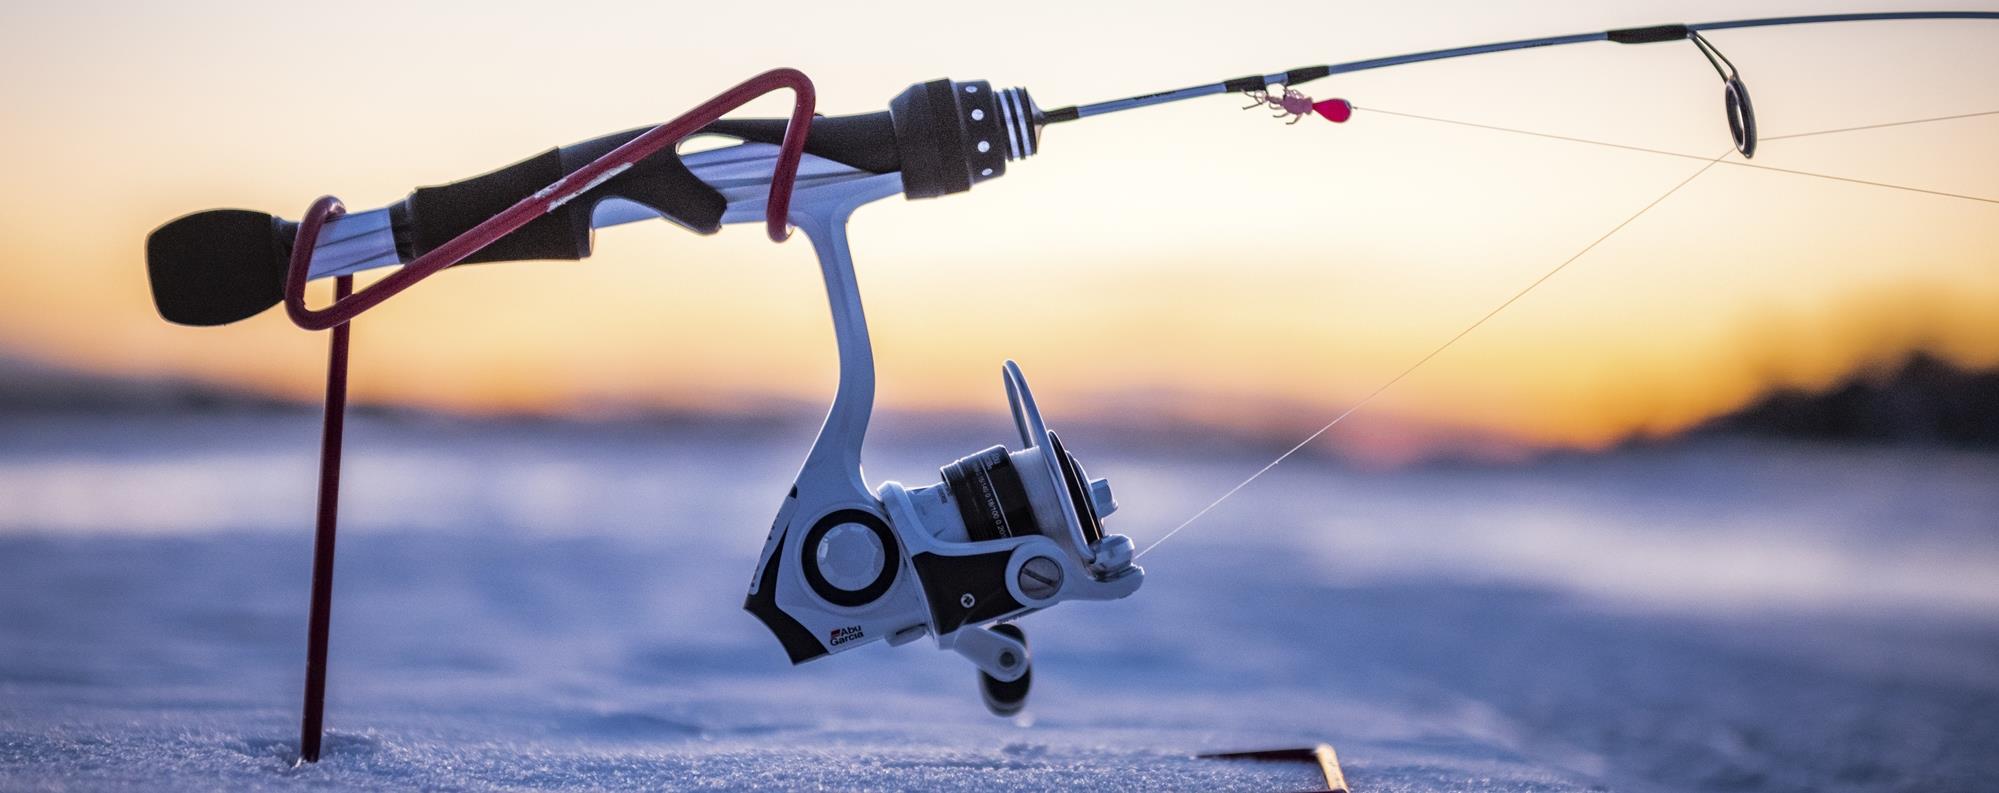 HT Ice Fishing Pro- Thermal Ice Fishing Tip-up